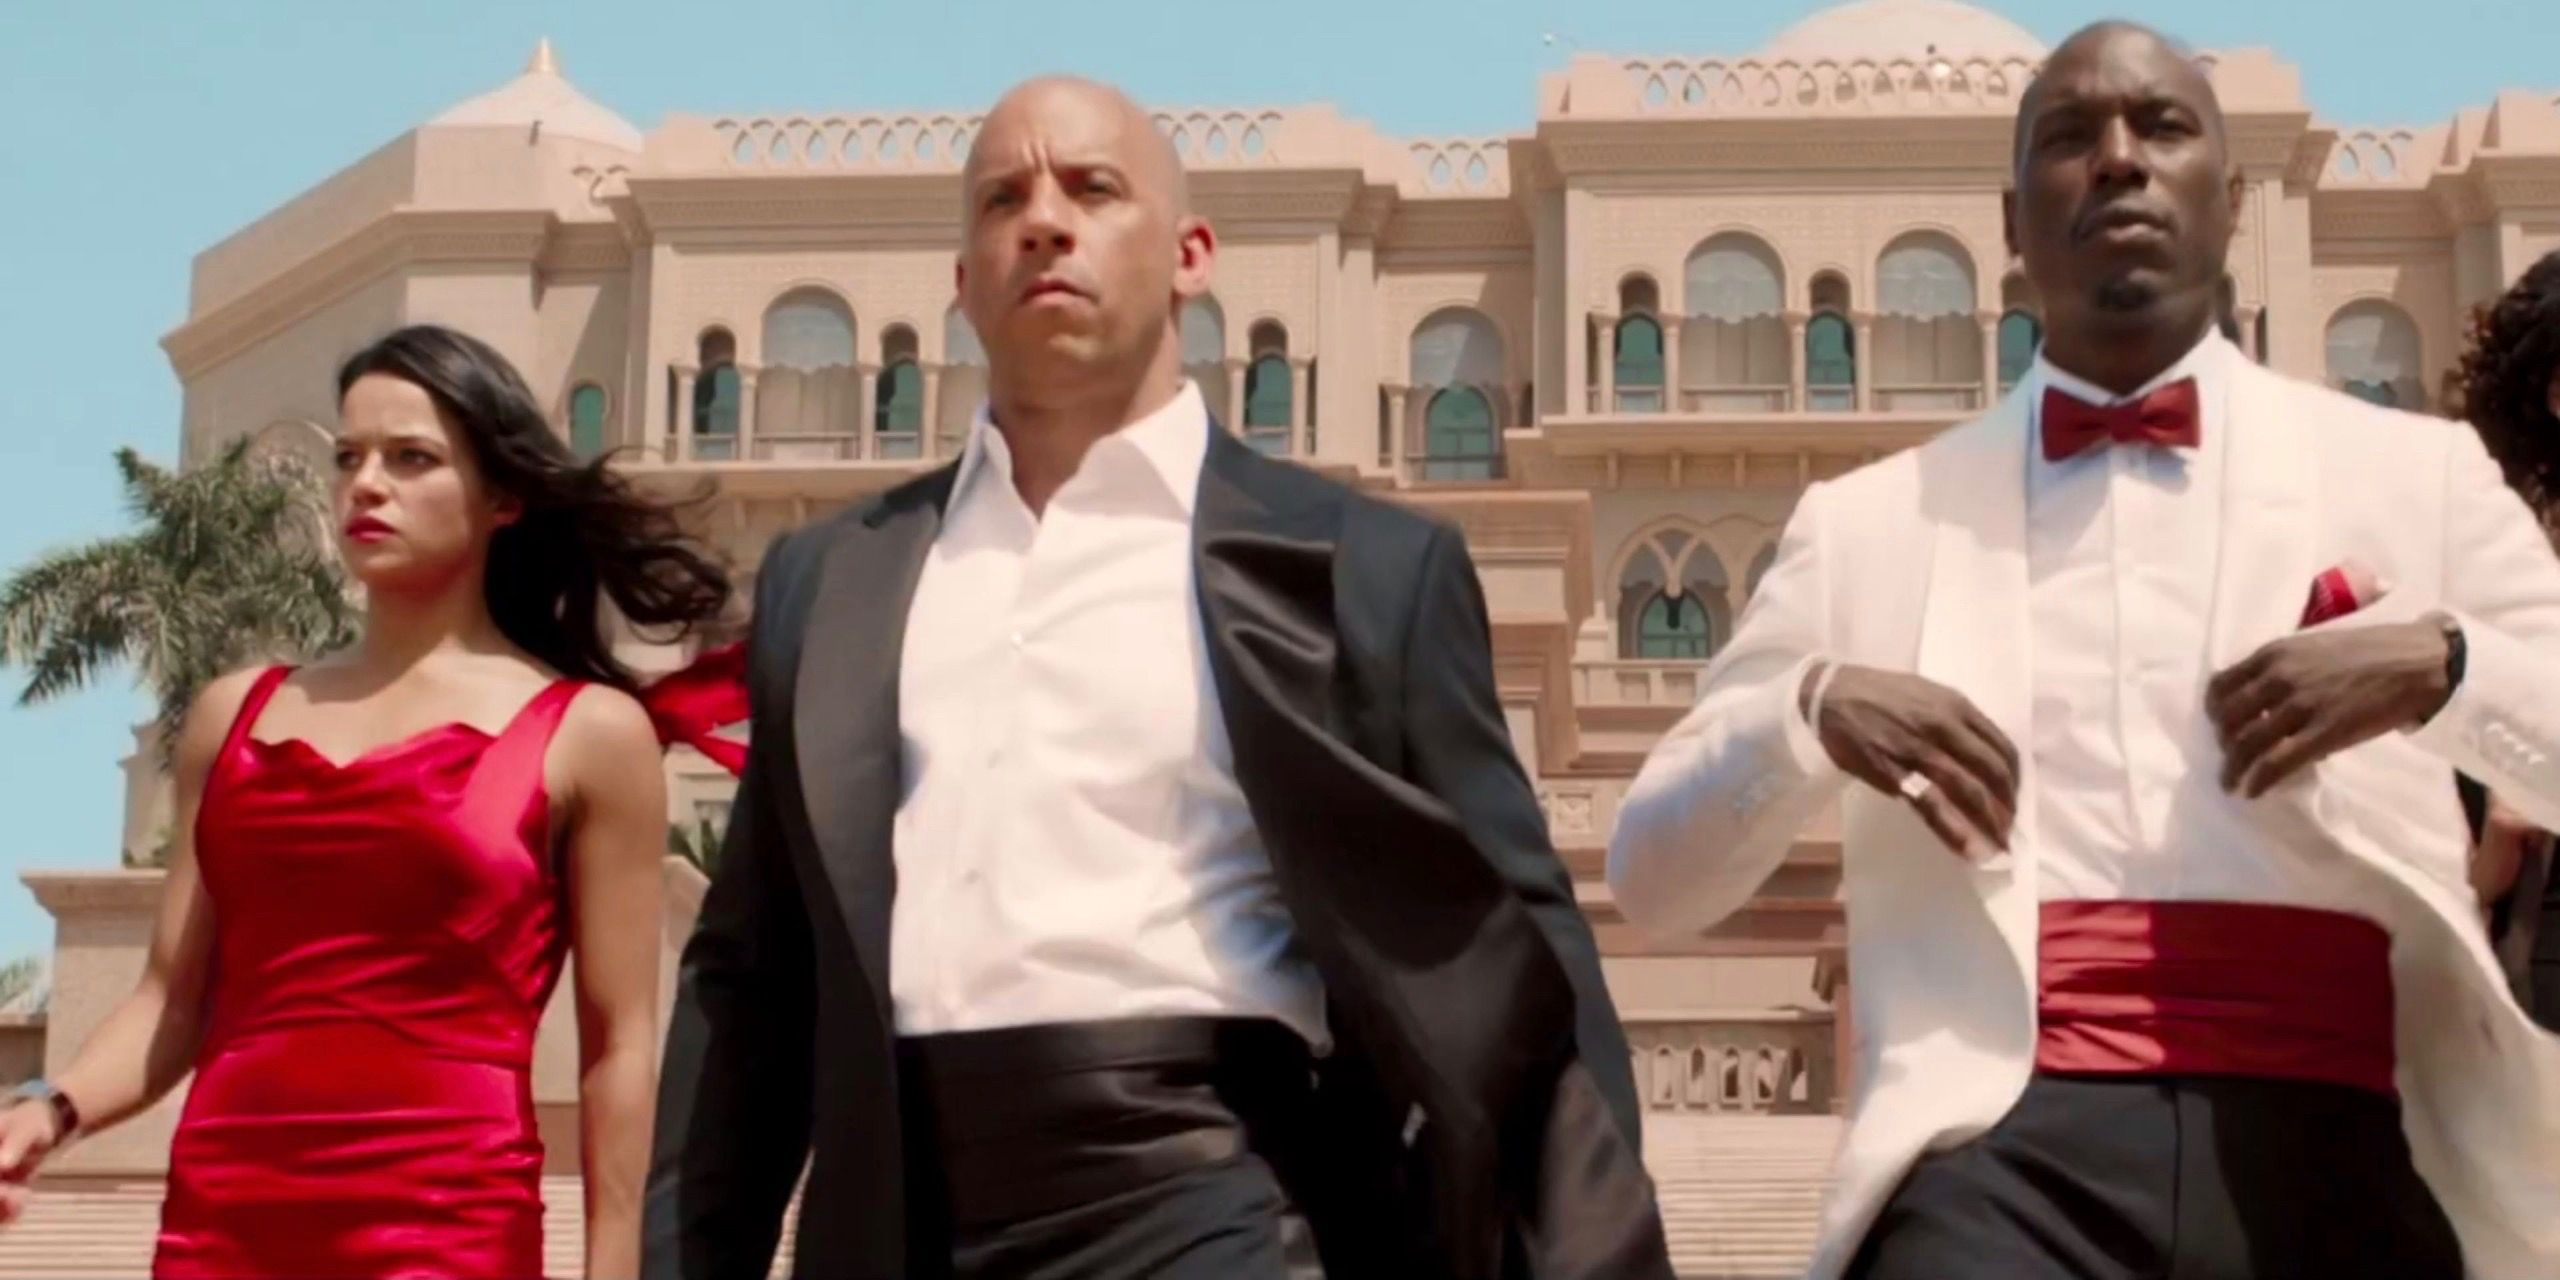 Michelle Rodriguez, Vin Diesel, and Tyrese Gibson in Furious 7